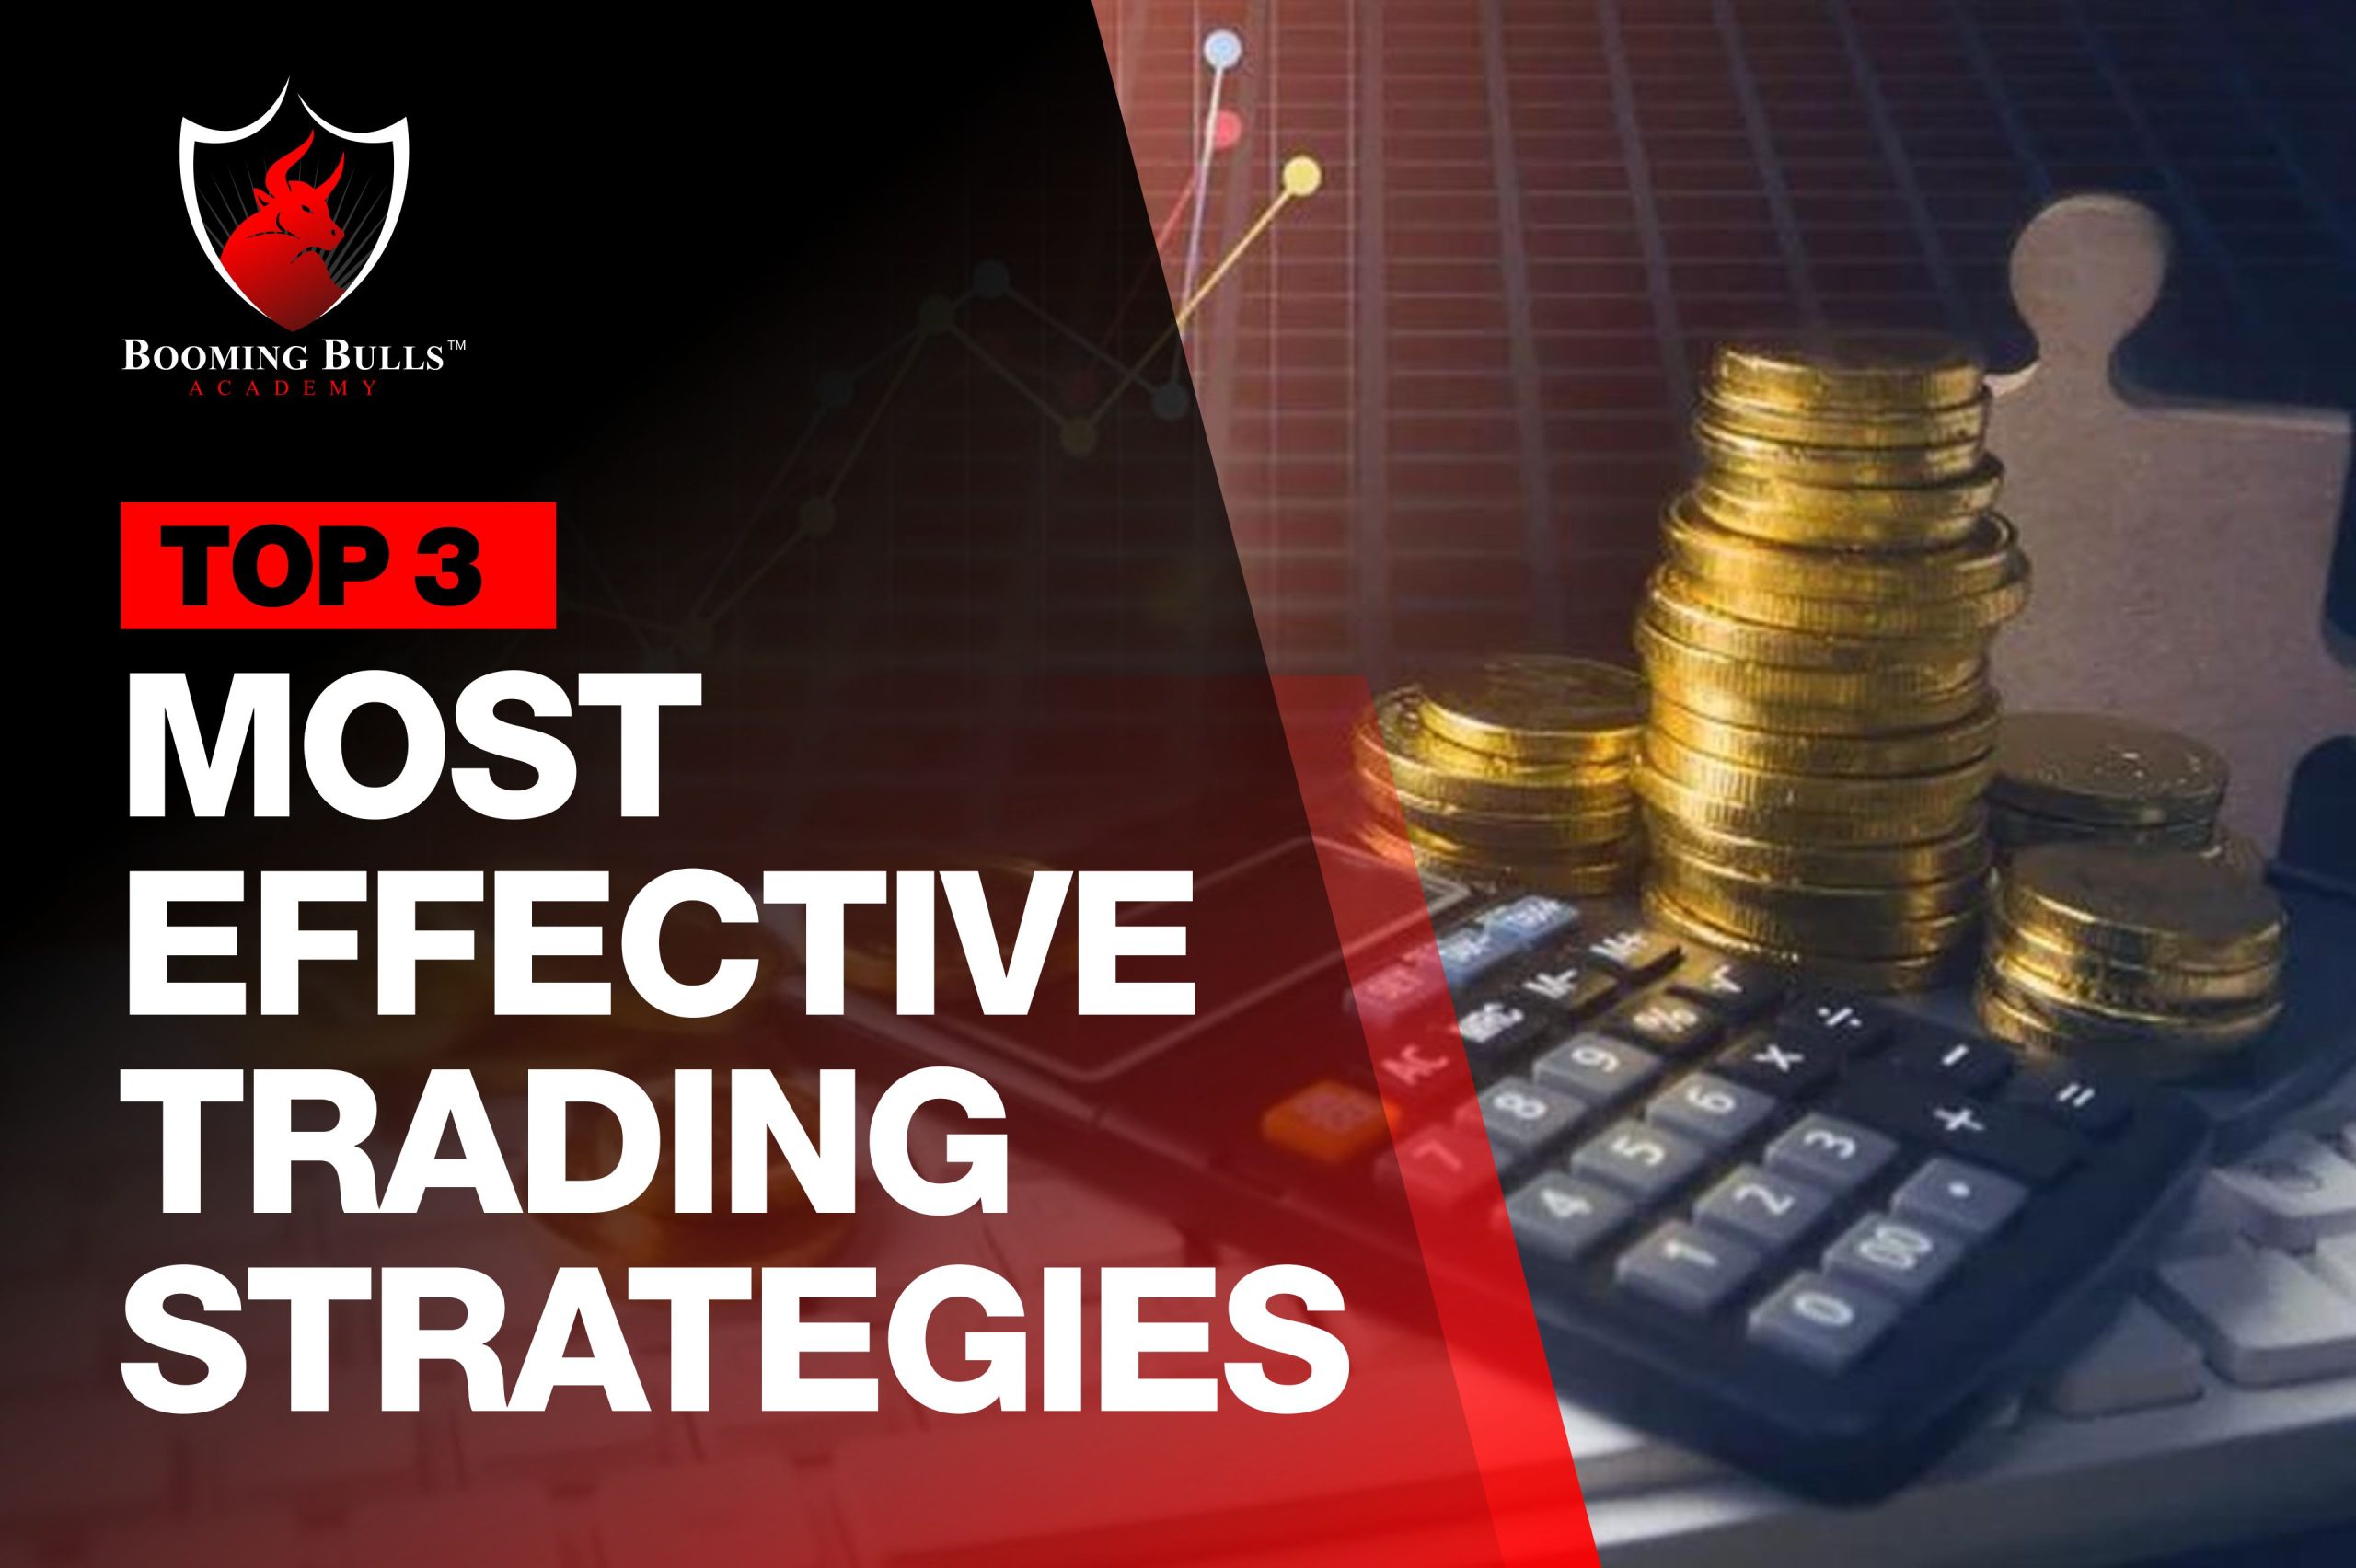 Top 3 Most Effective Trading Strategies